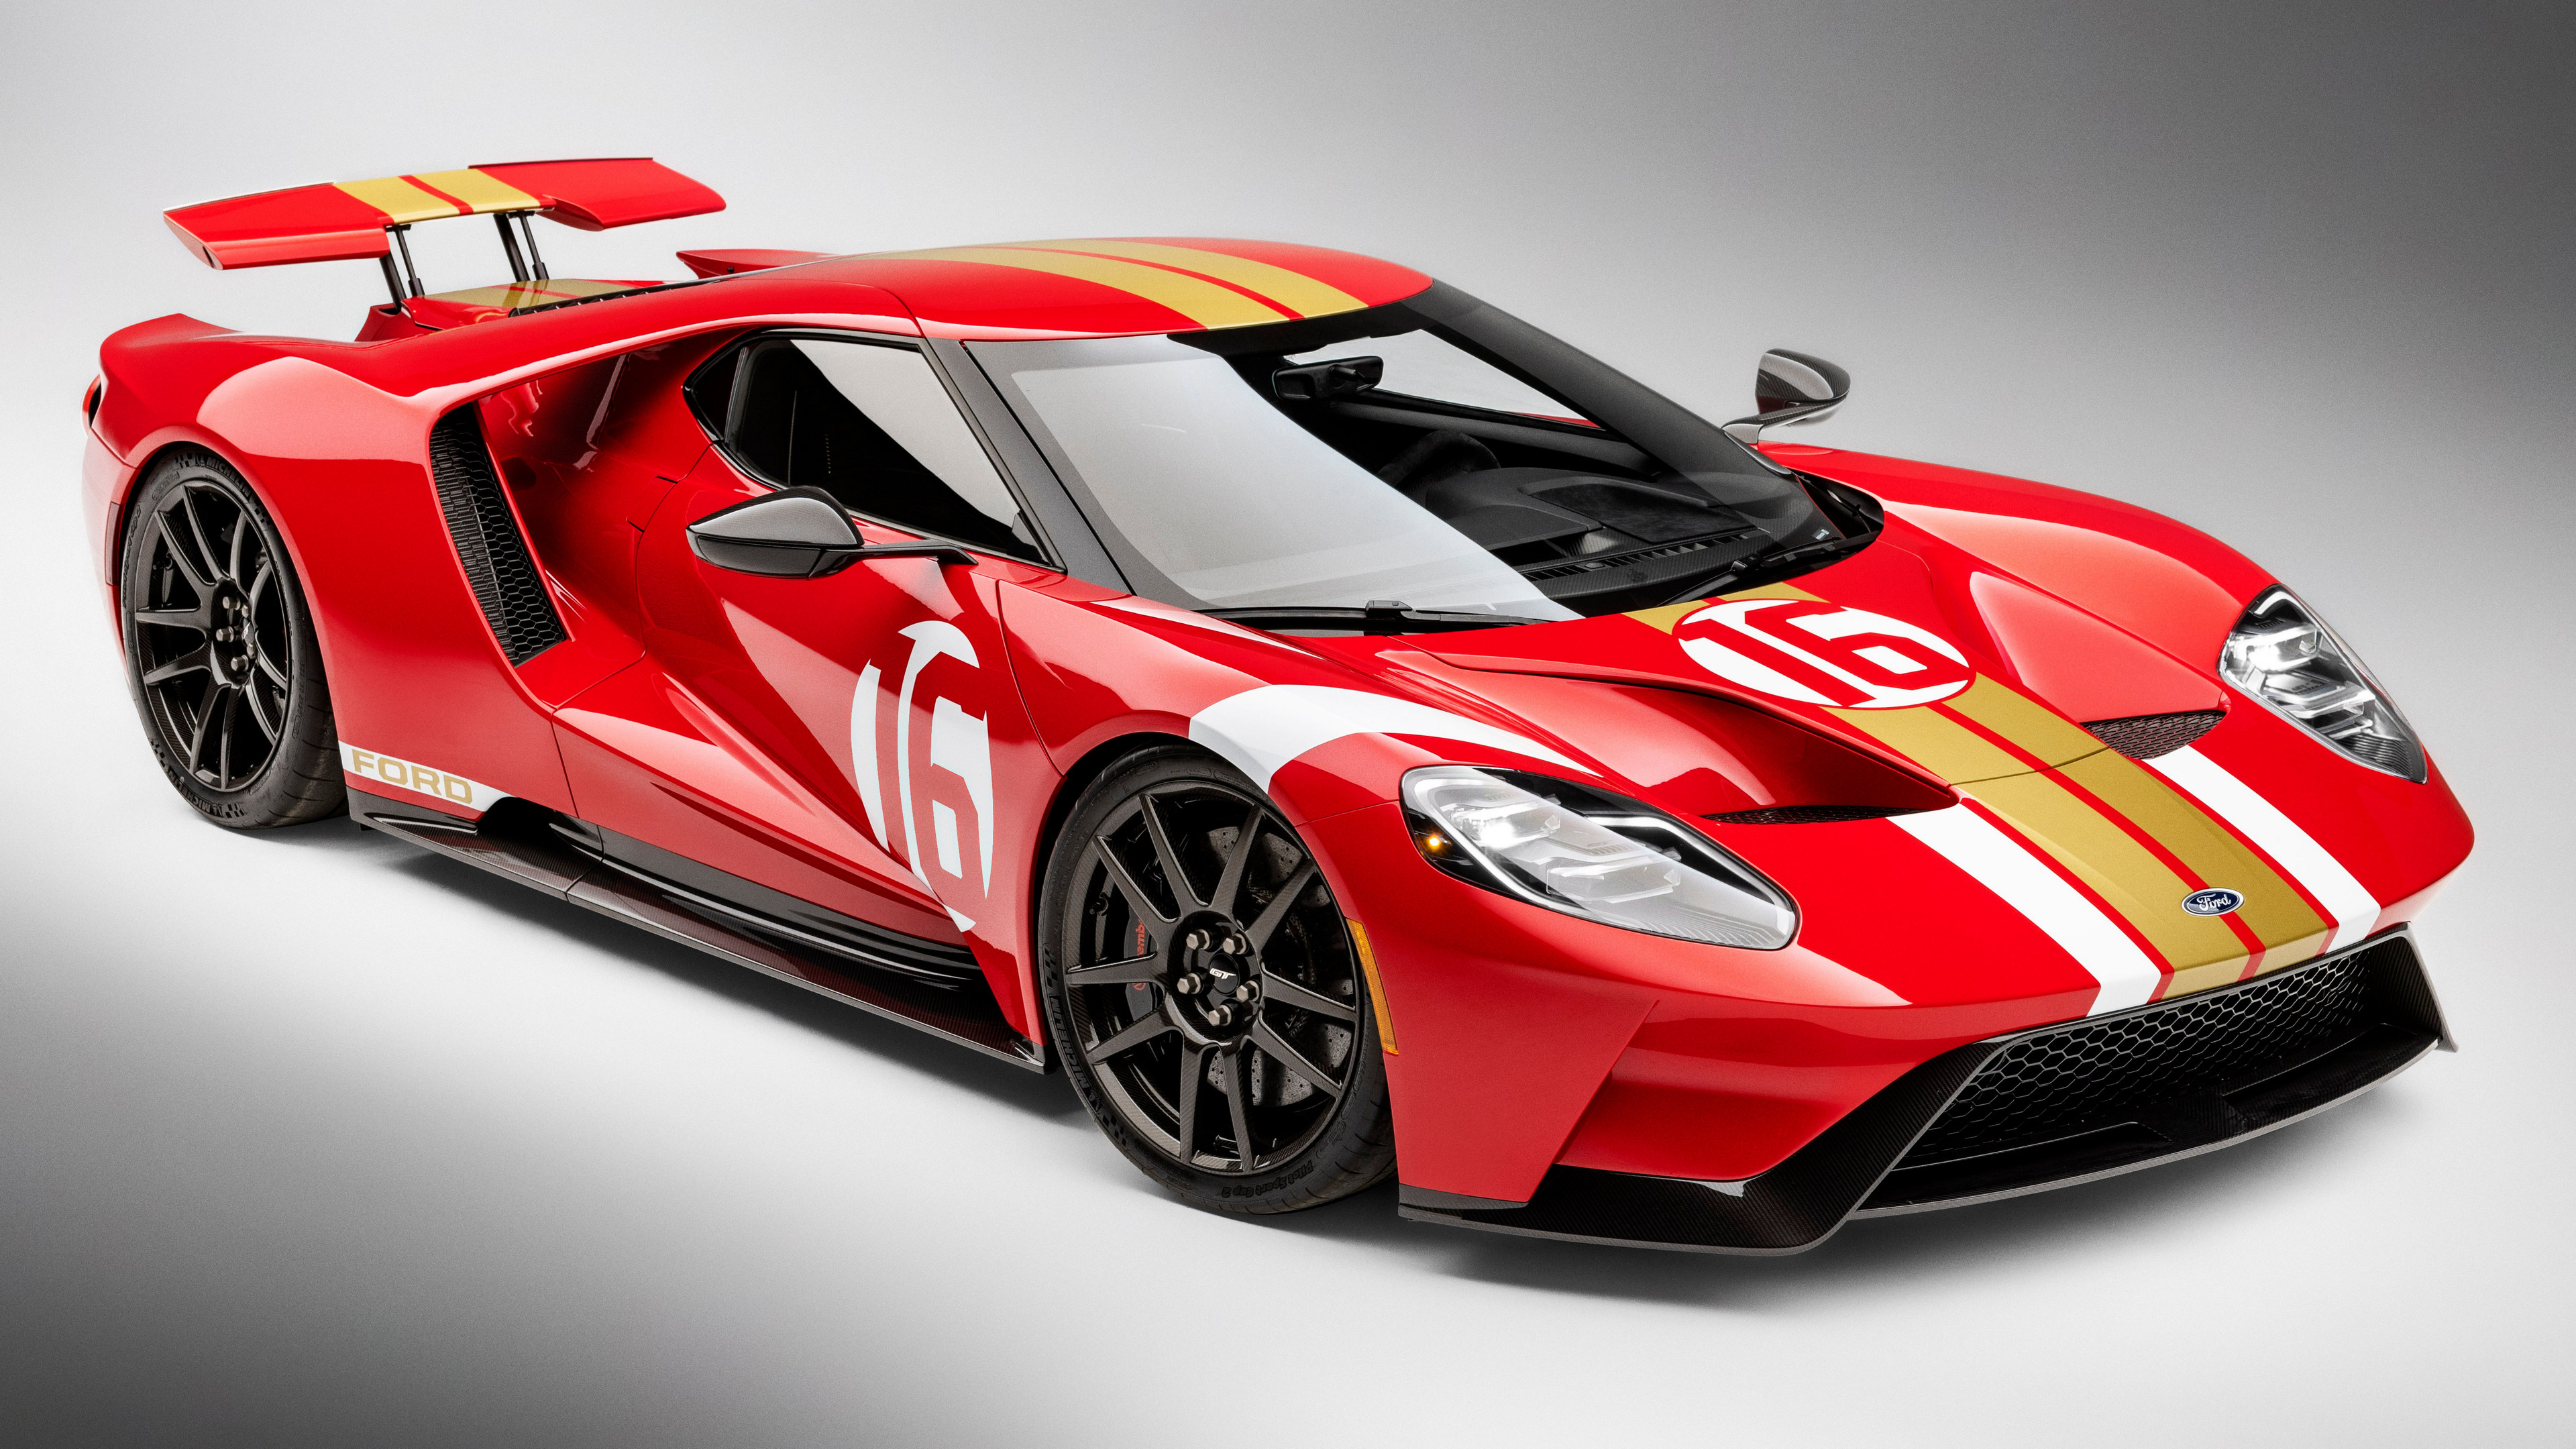 Ford GT Supercars Simple Background Red Ford American Cars Vehicle Red Cars Car Sports Car 3840x2160